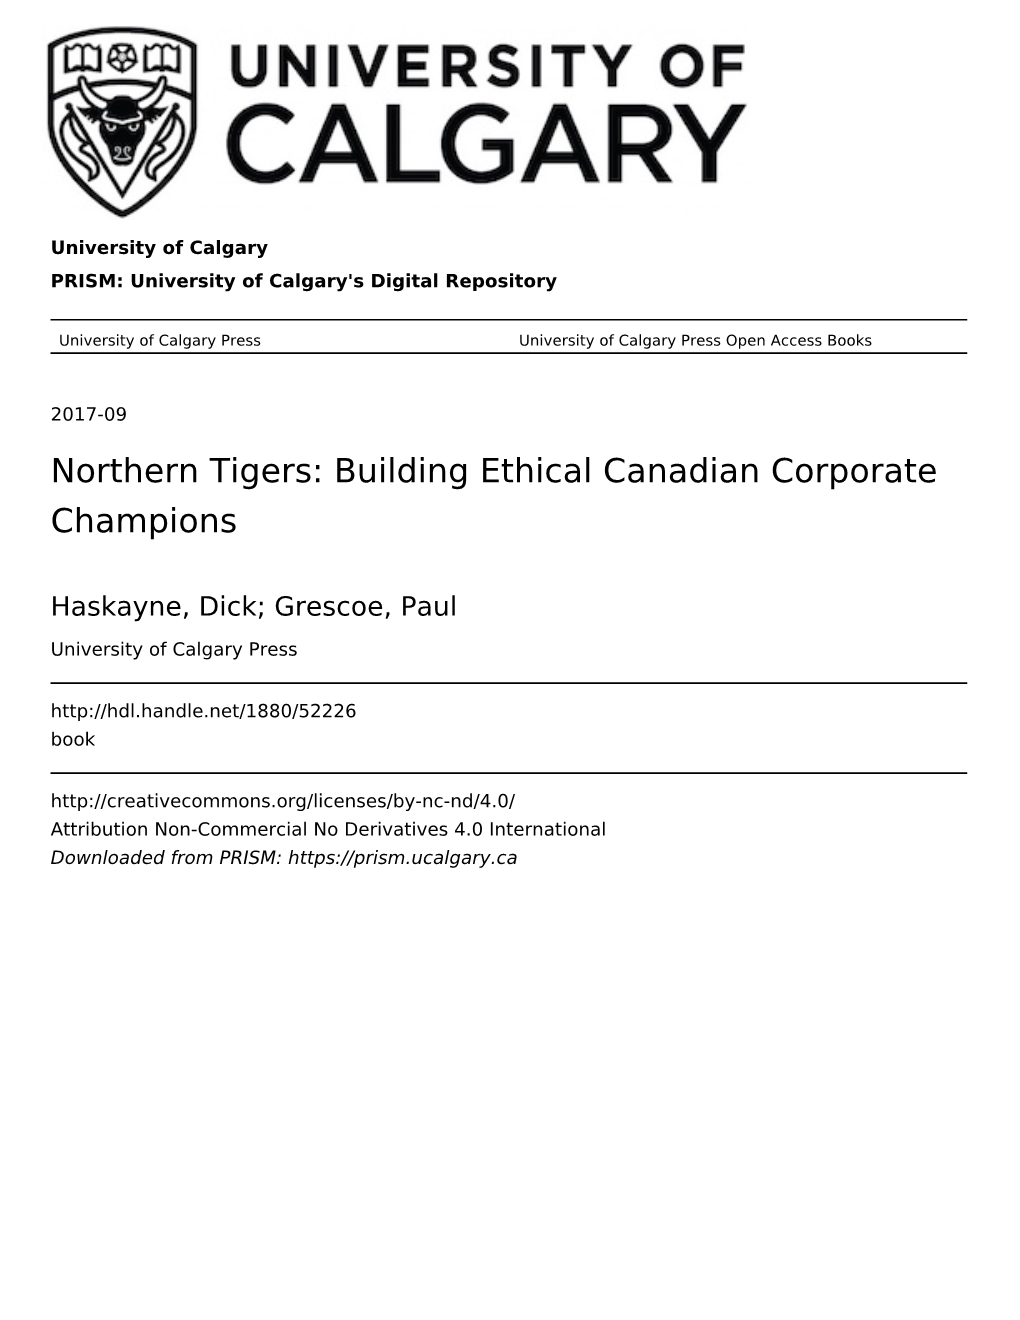 Building Ethical Canadian Corporate Champions